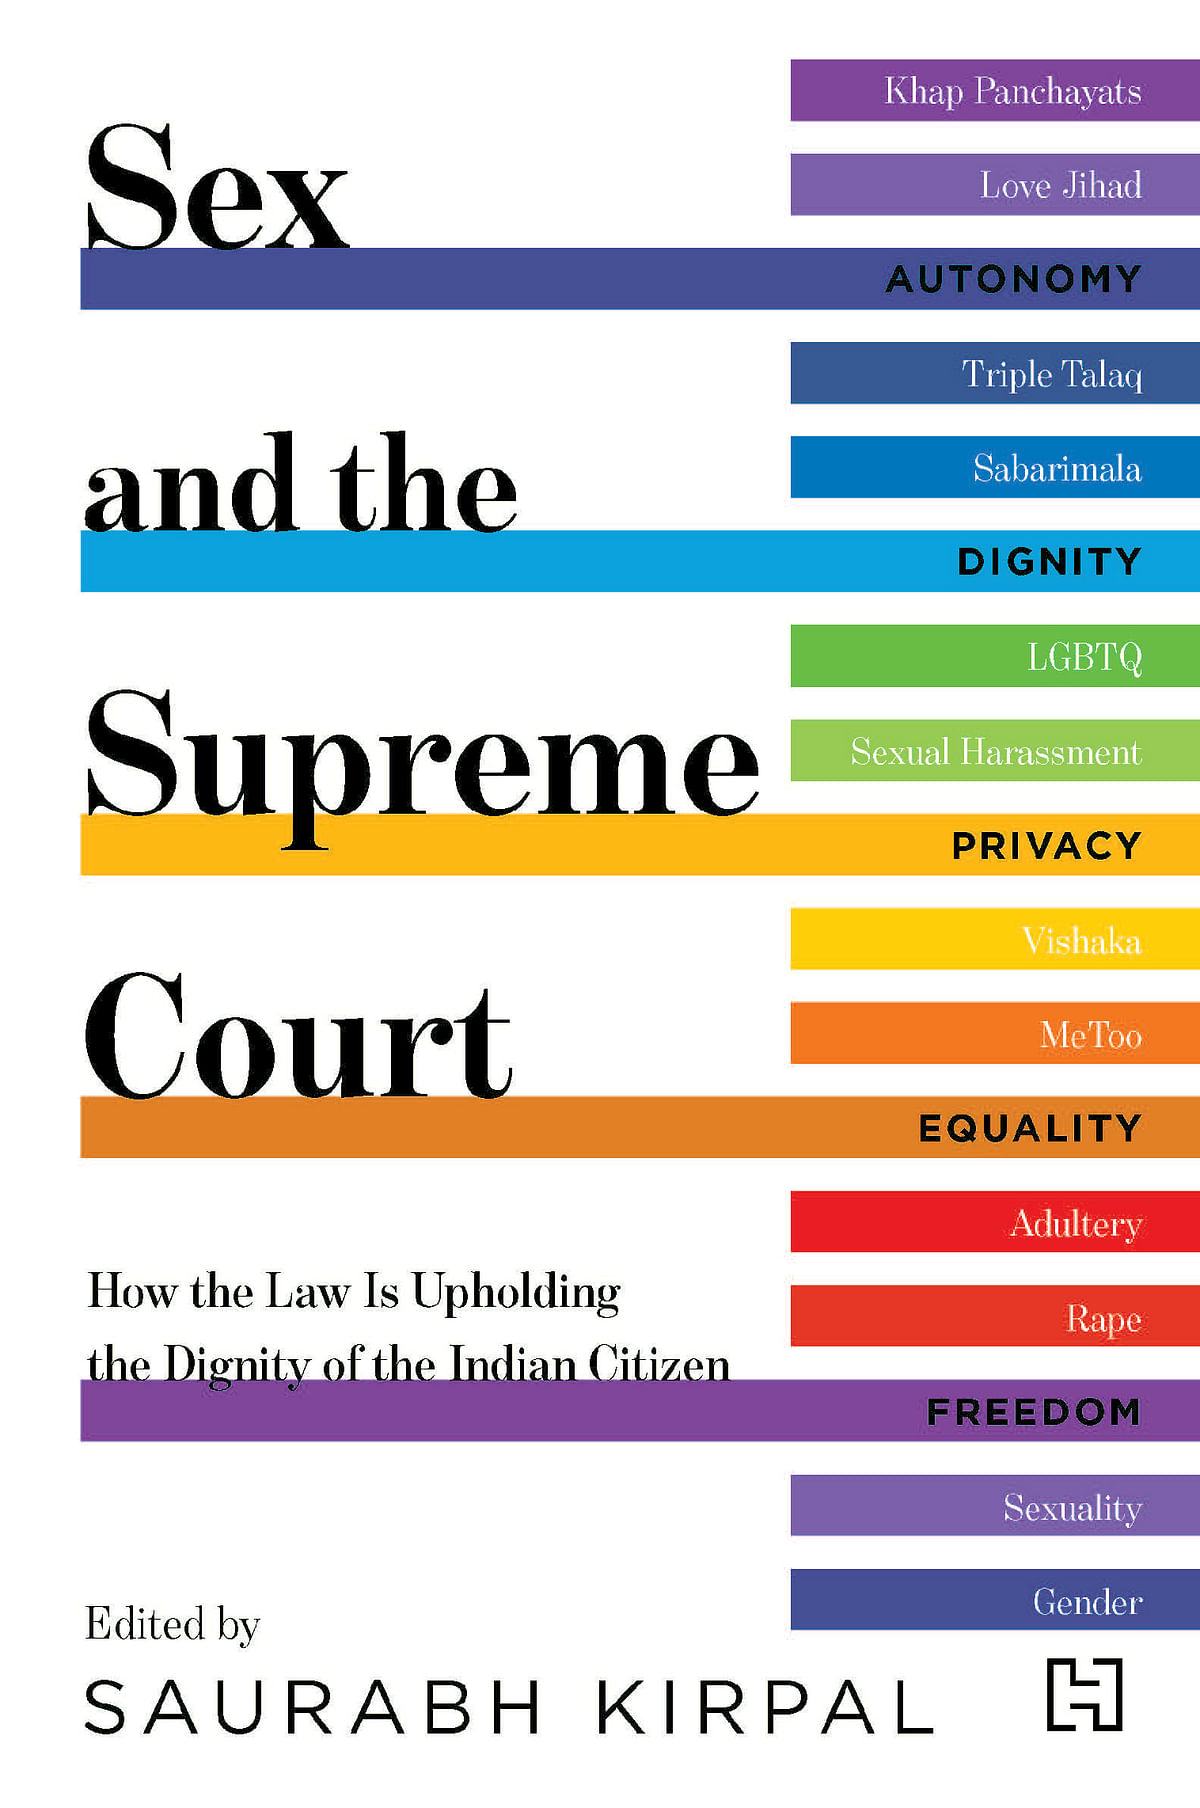 An exclusive excerpt from ‘Sex and the Supreme Court,’ a book on the landmark judgments passed by the apex court.